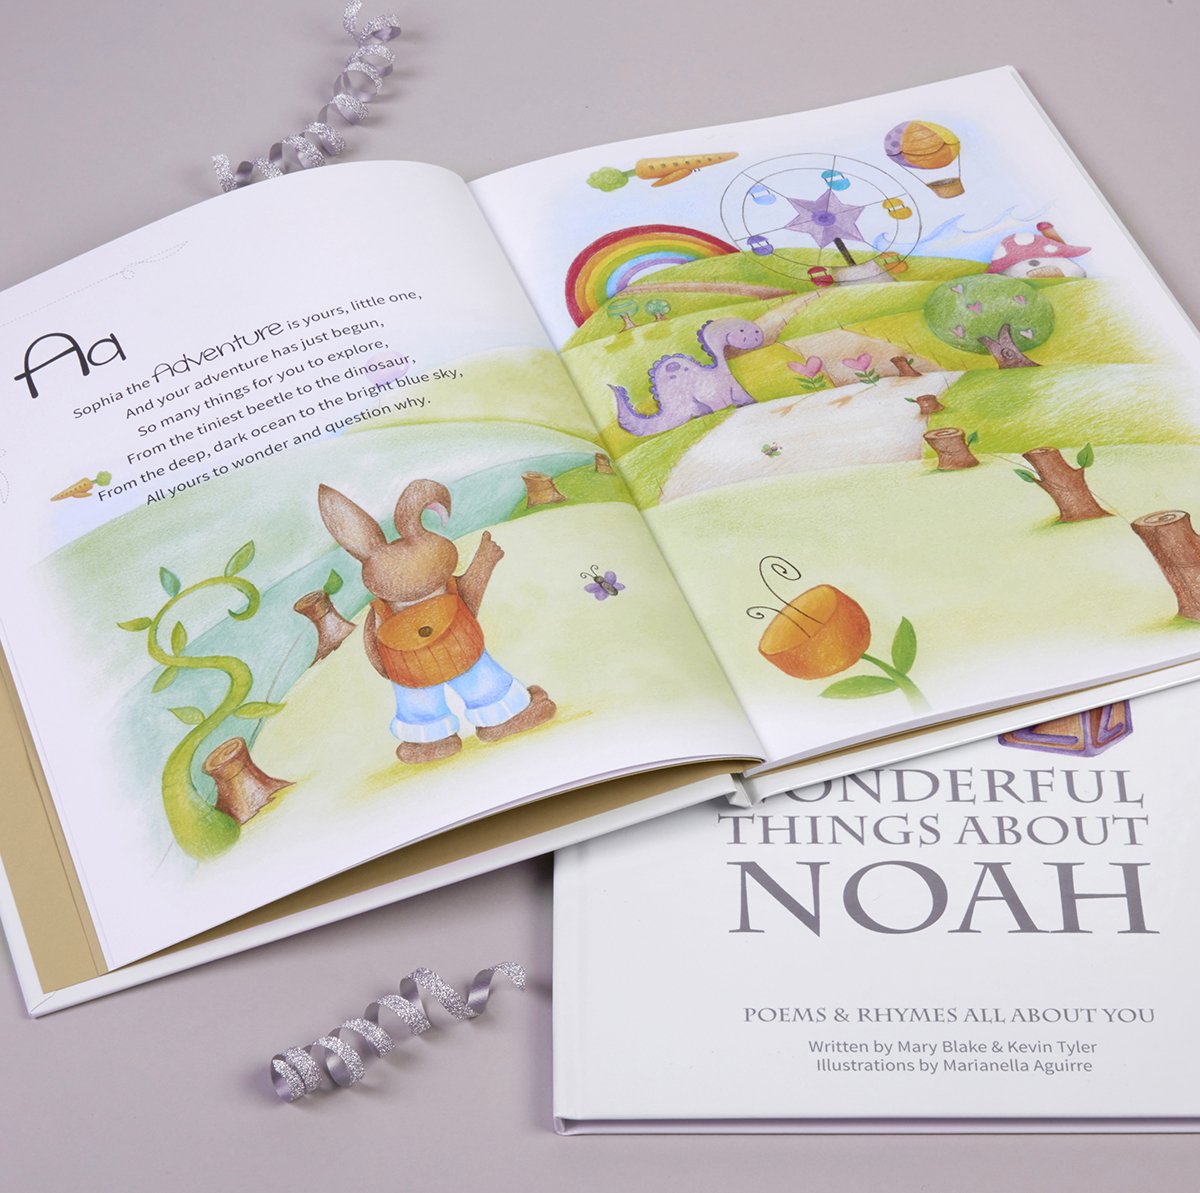 Personalised Children's Book - A to Z of Wonderful Things